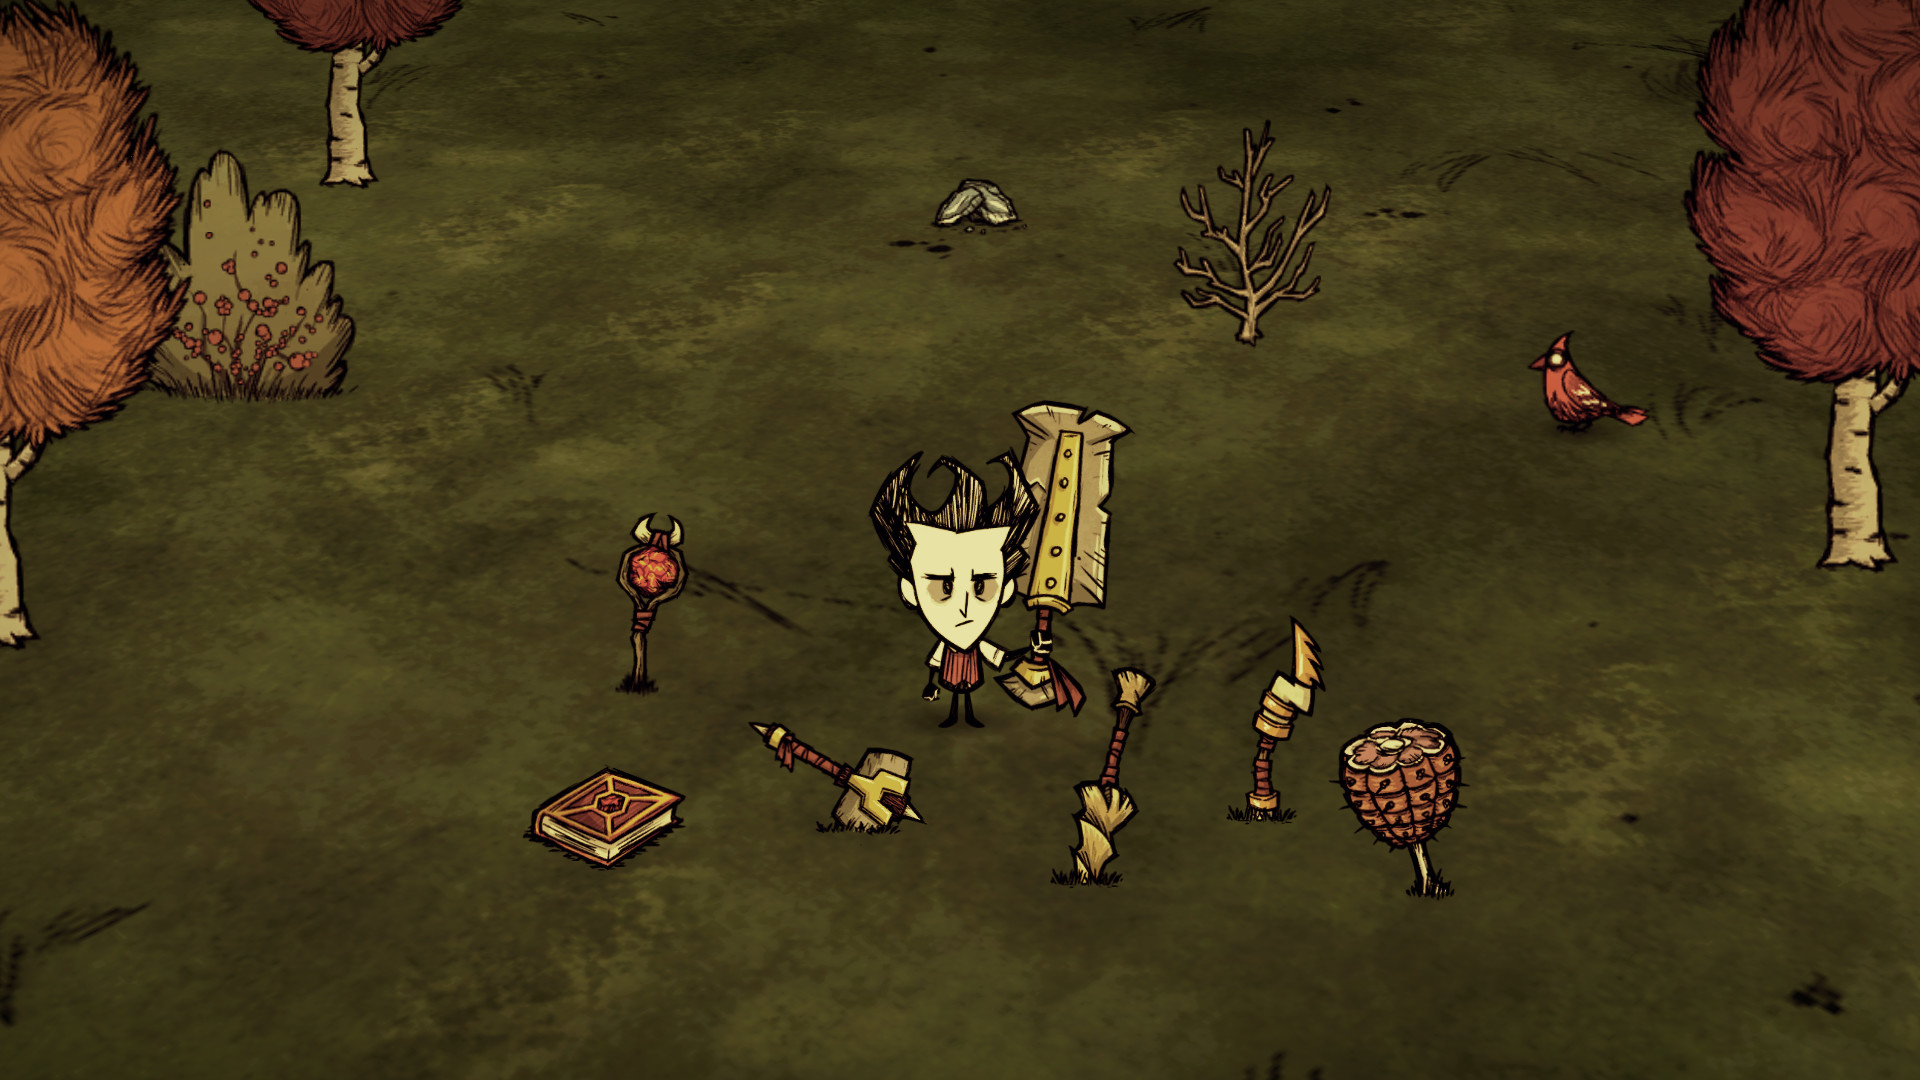 Don t starve together six update. Don t Starve together. Don старв together. Выживалка don't Starve. Донт старв тогетхер.